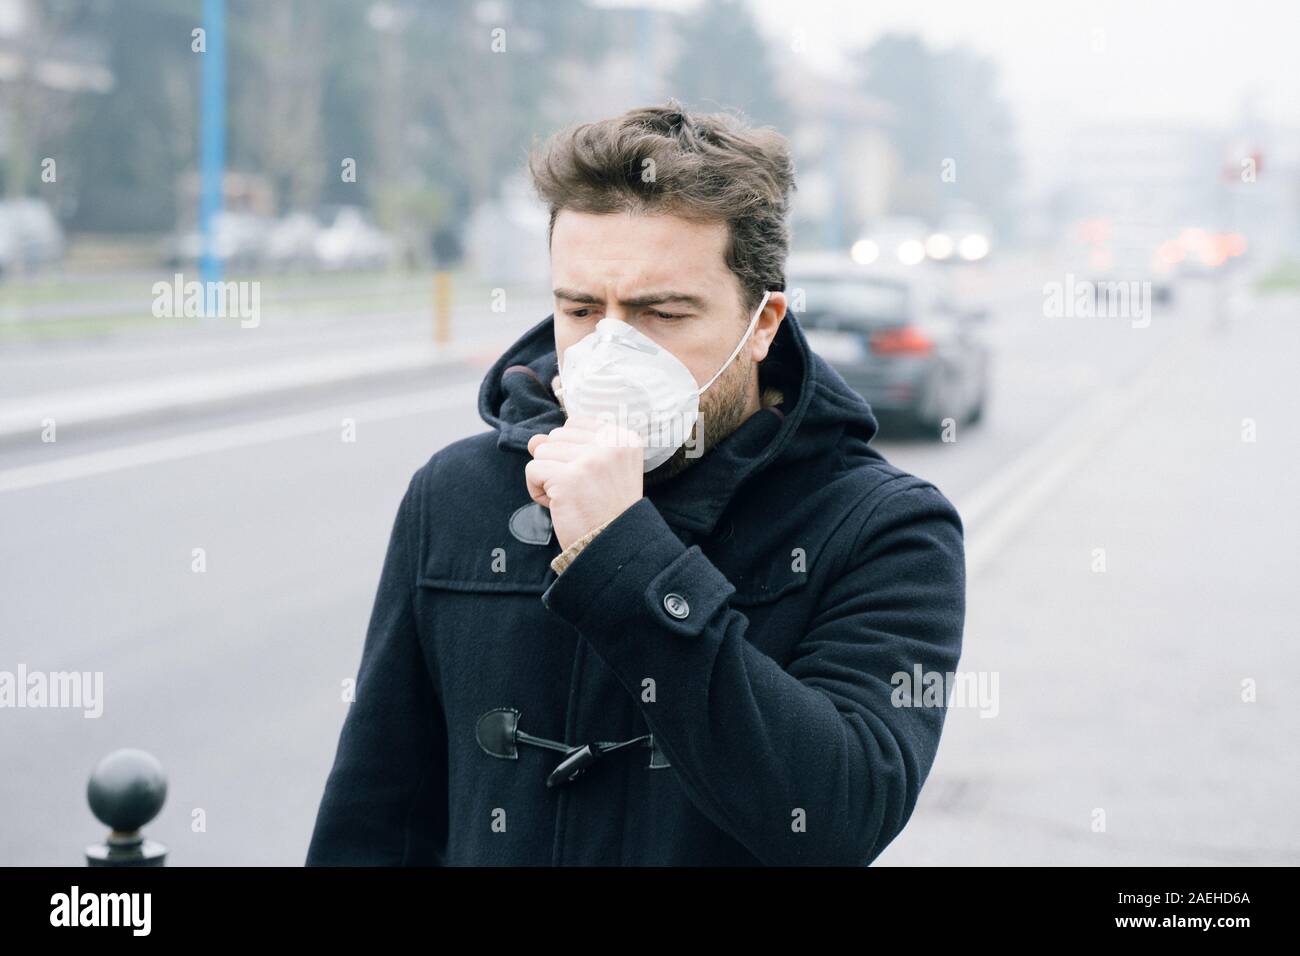 Man wearing protection mask against traffic smog air Stock Photo